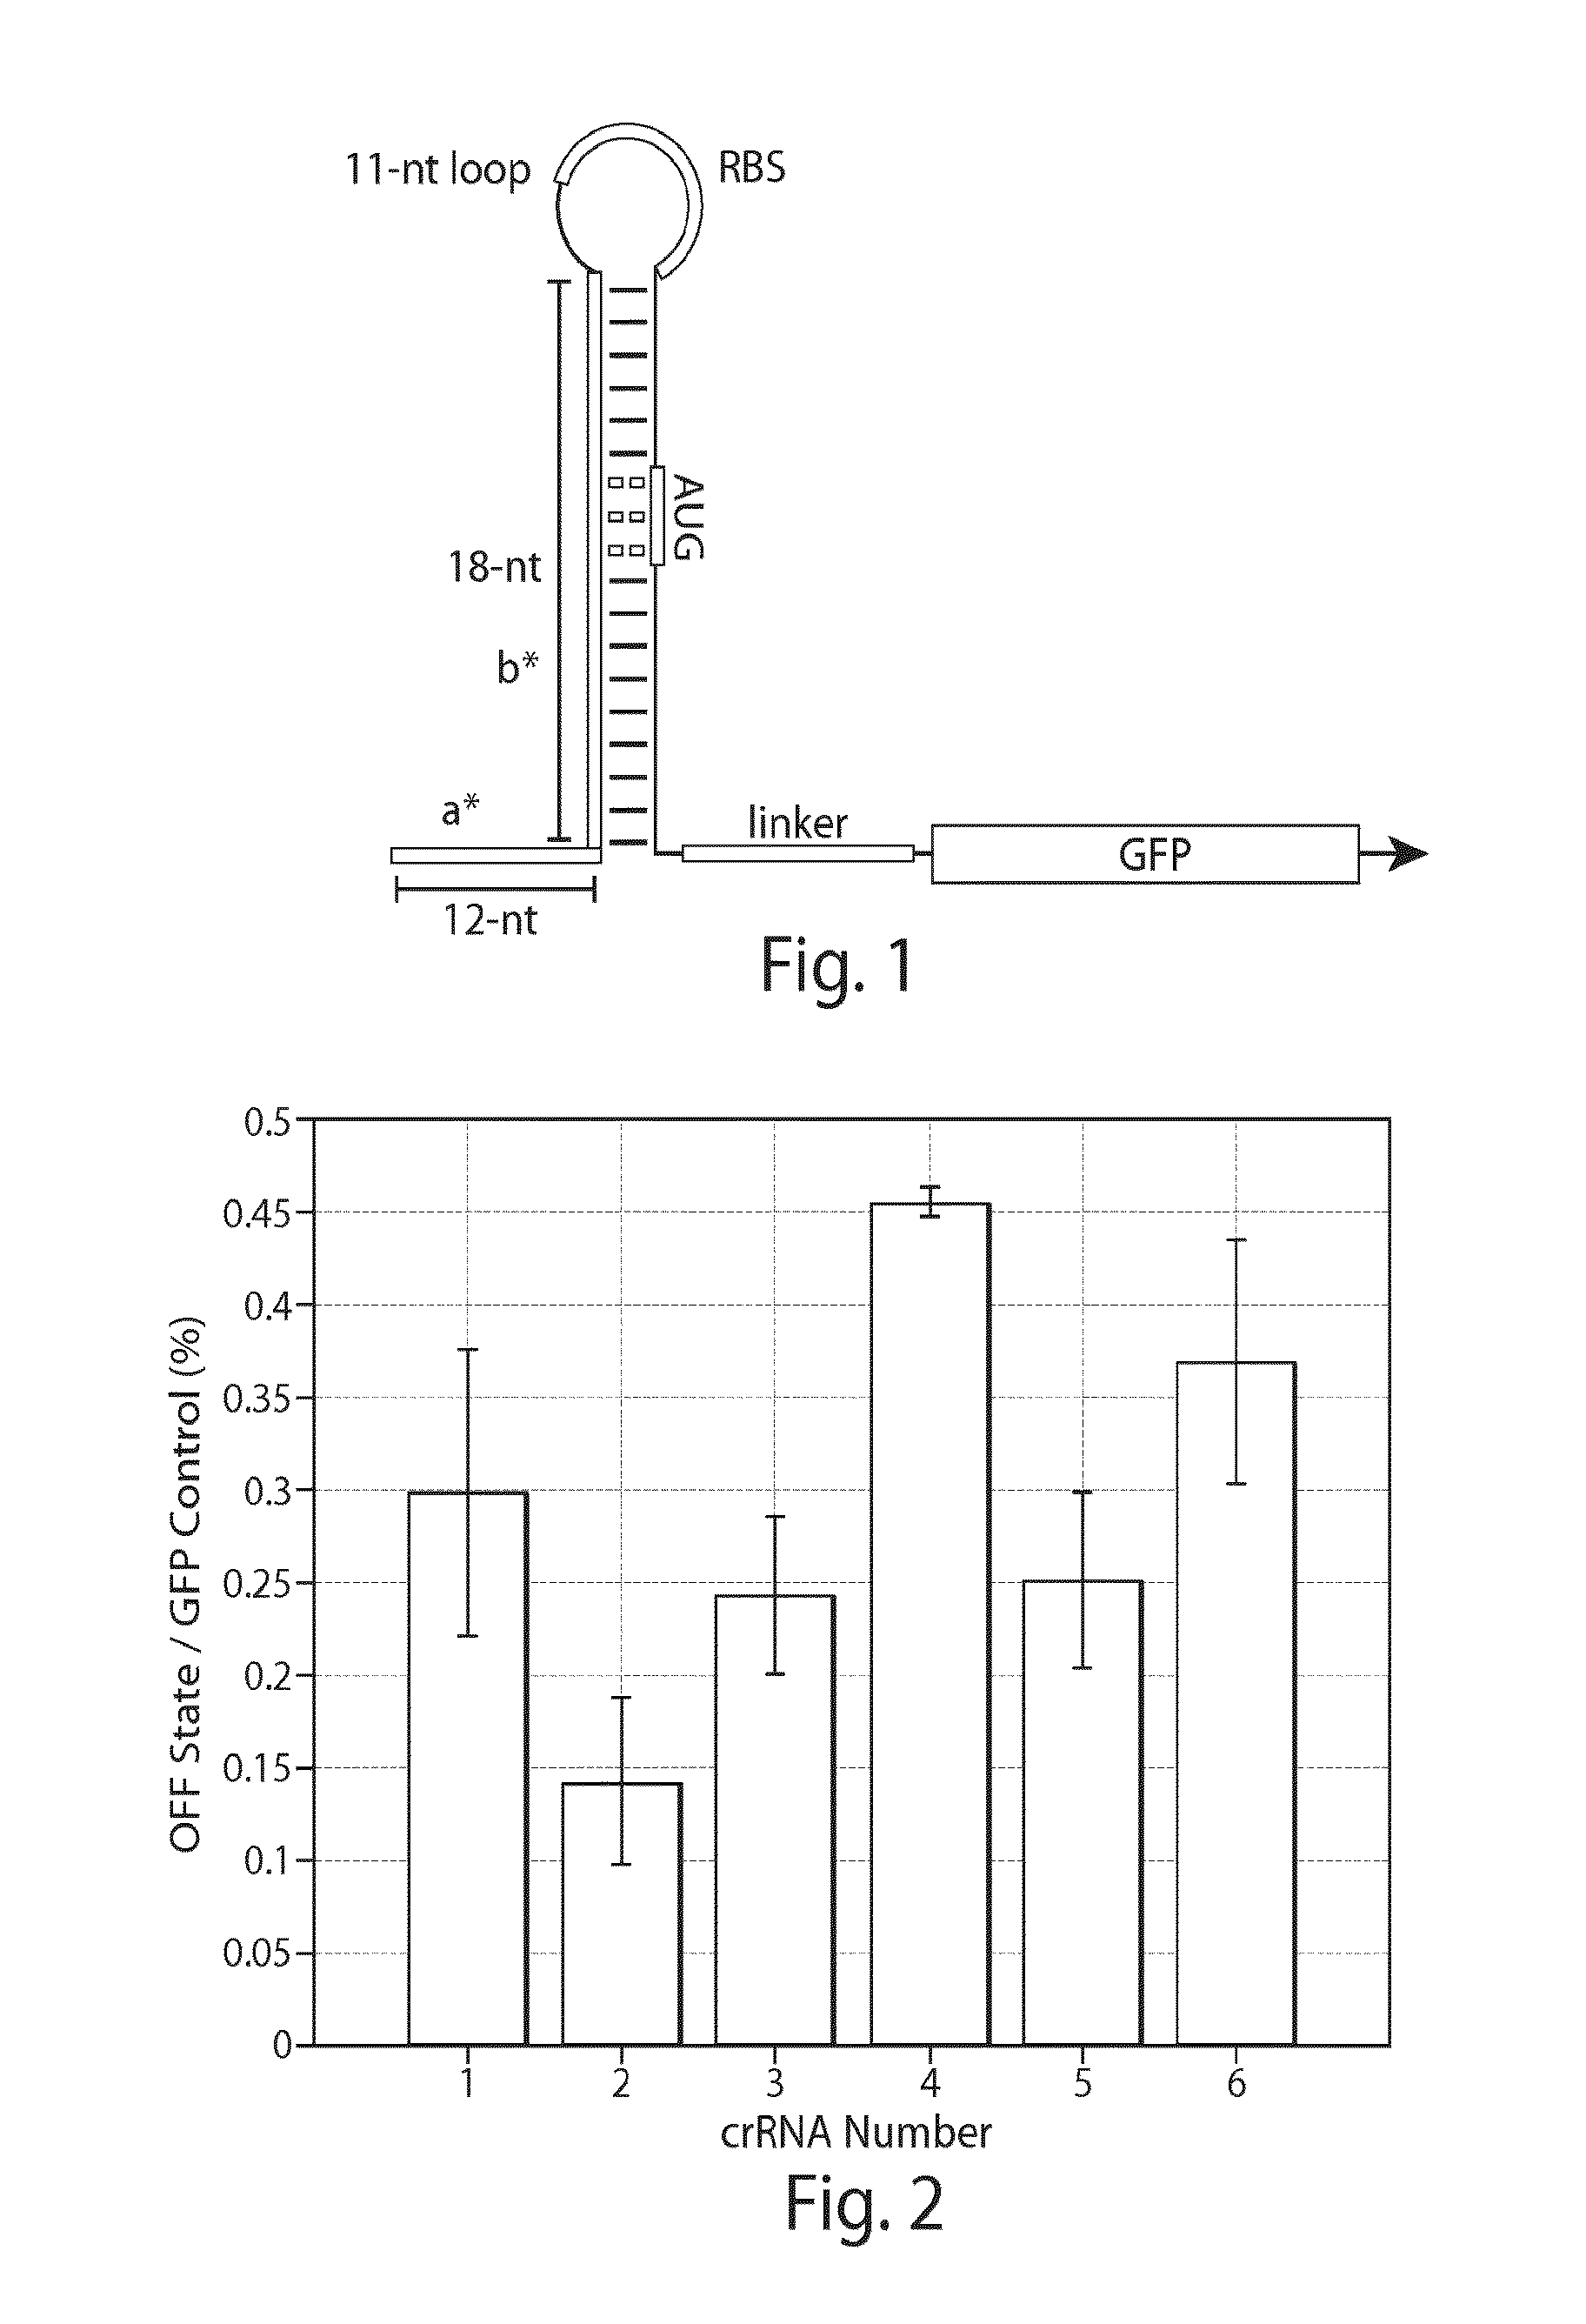 Riboregulator compositions and methods of use